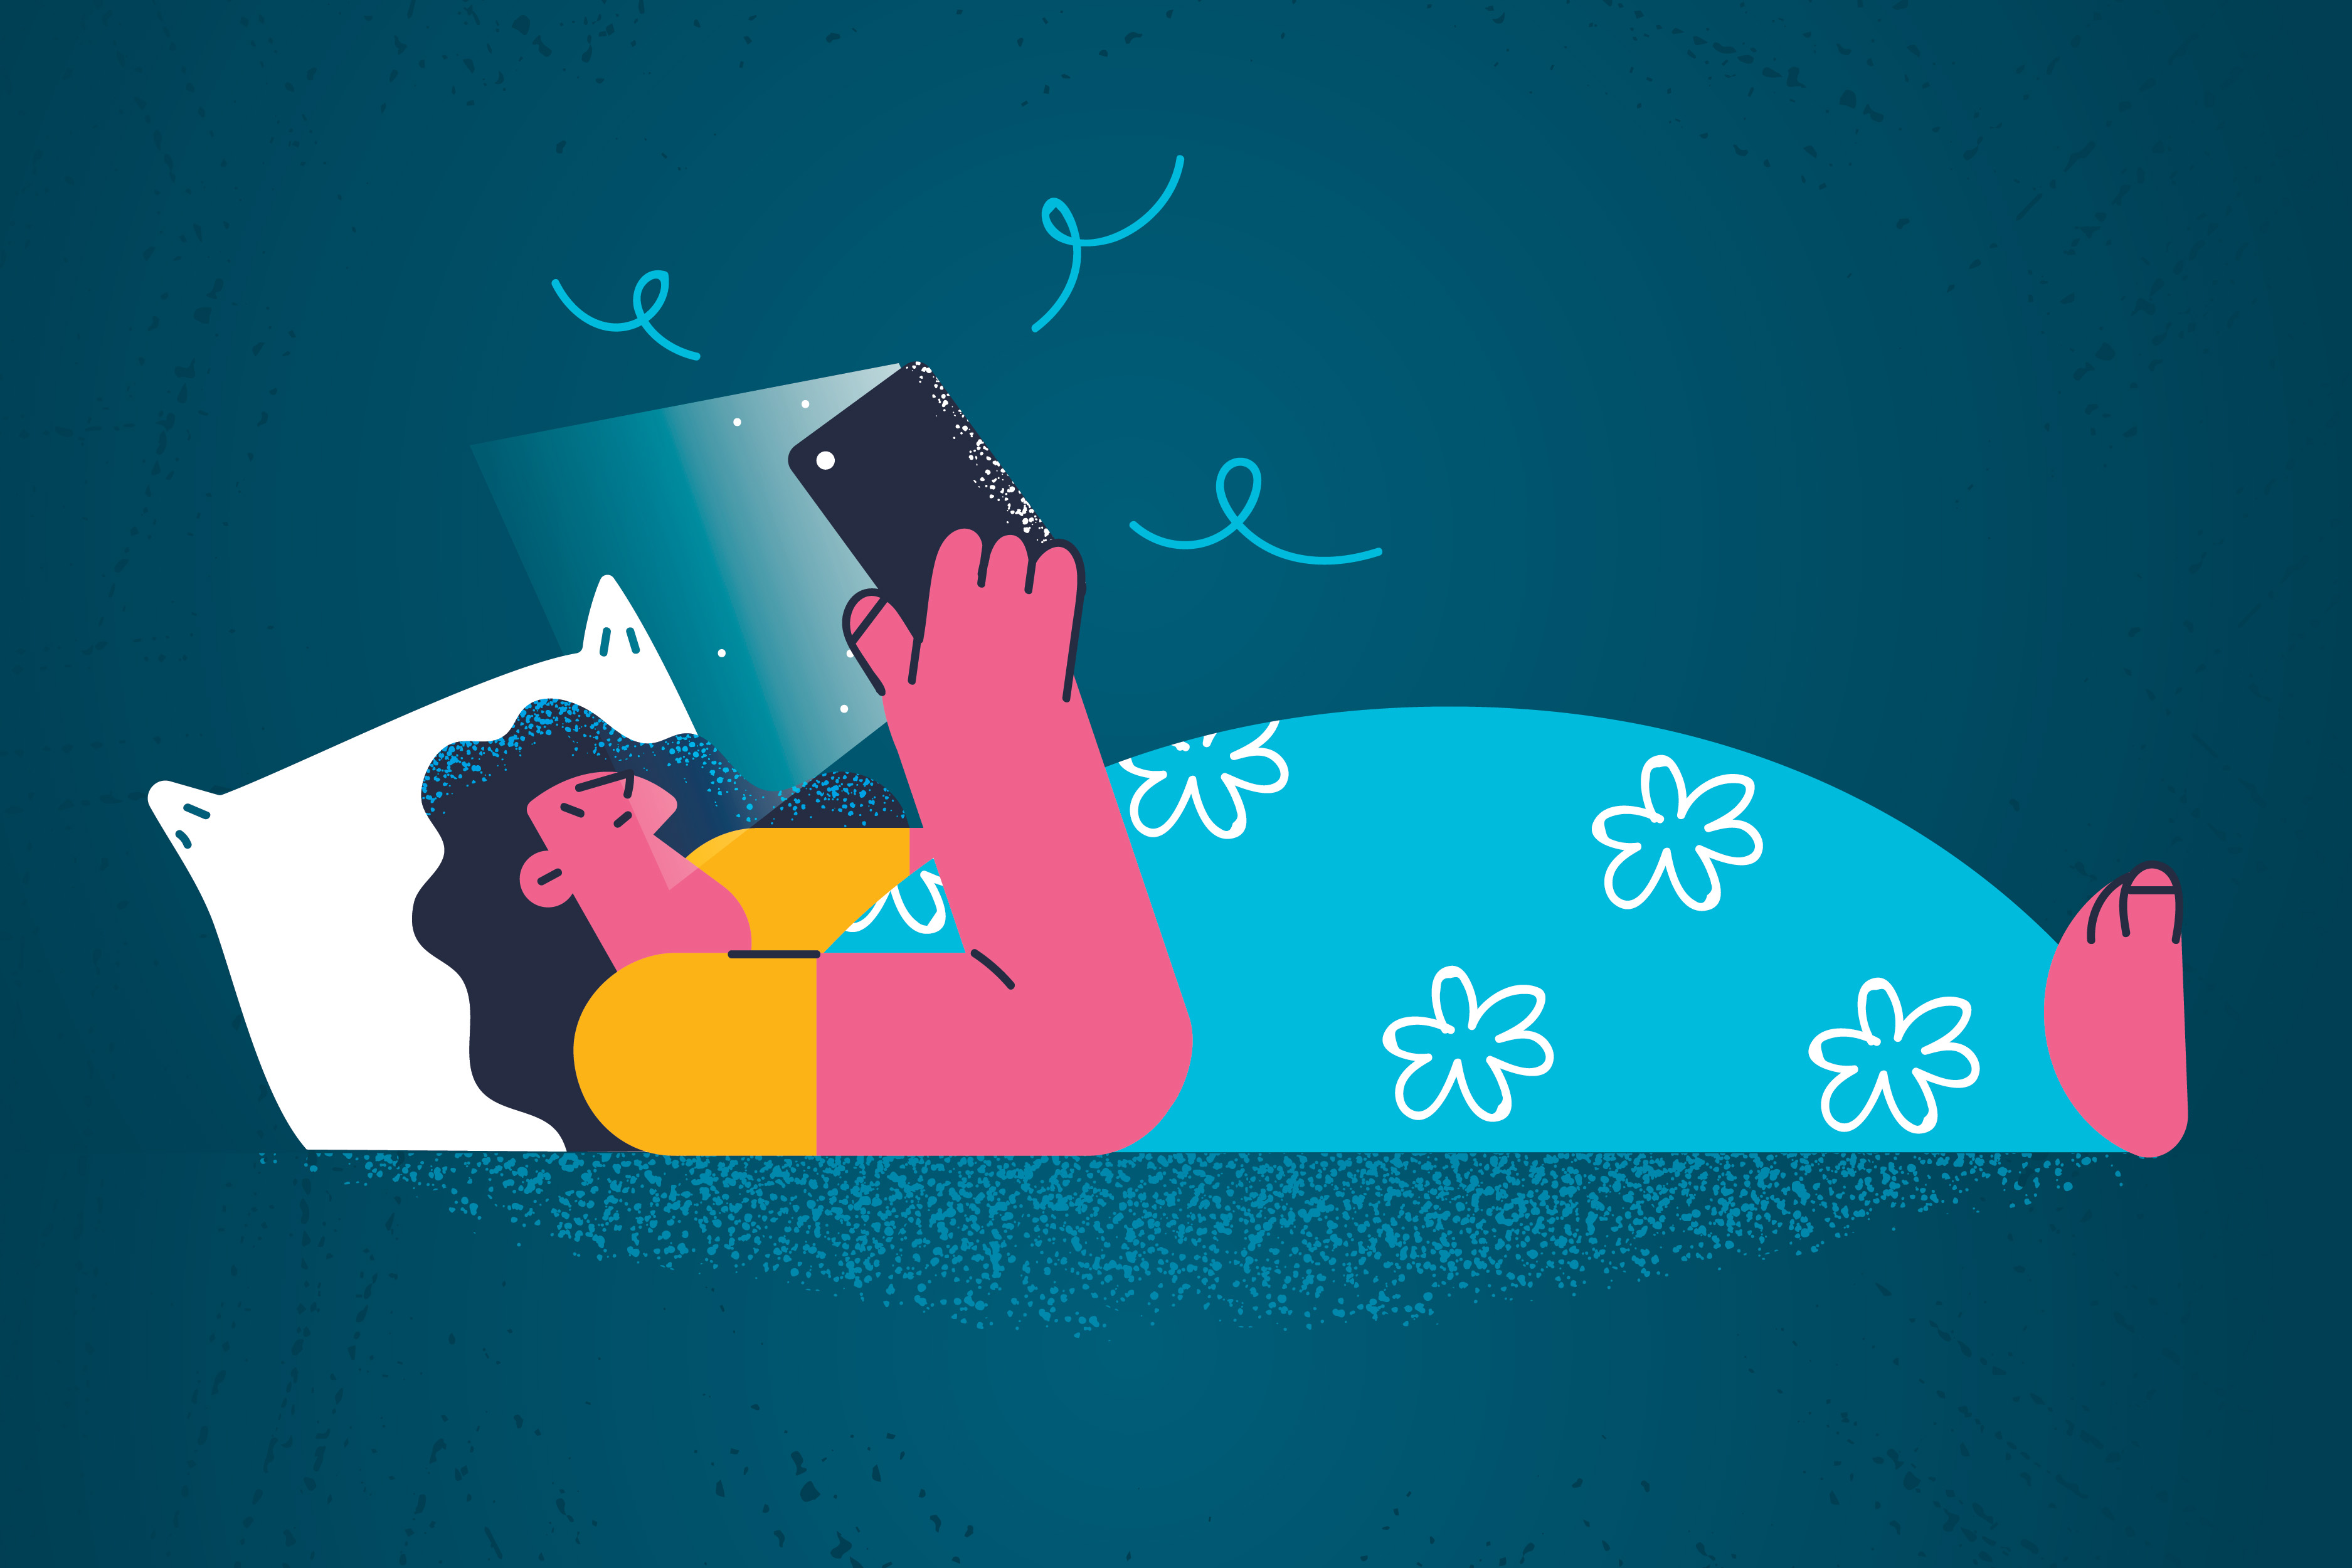 A woman lies in bed looking at a smartphone while tucked under a blue blanket with flowers on it.